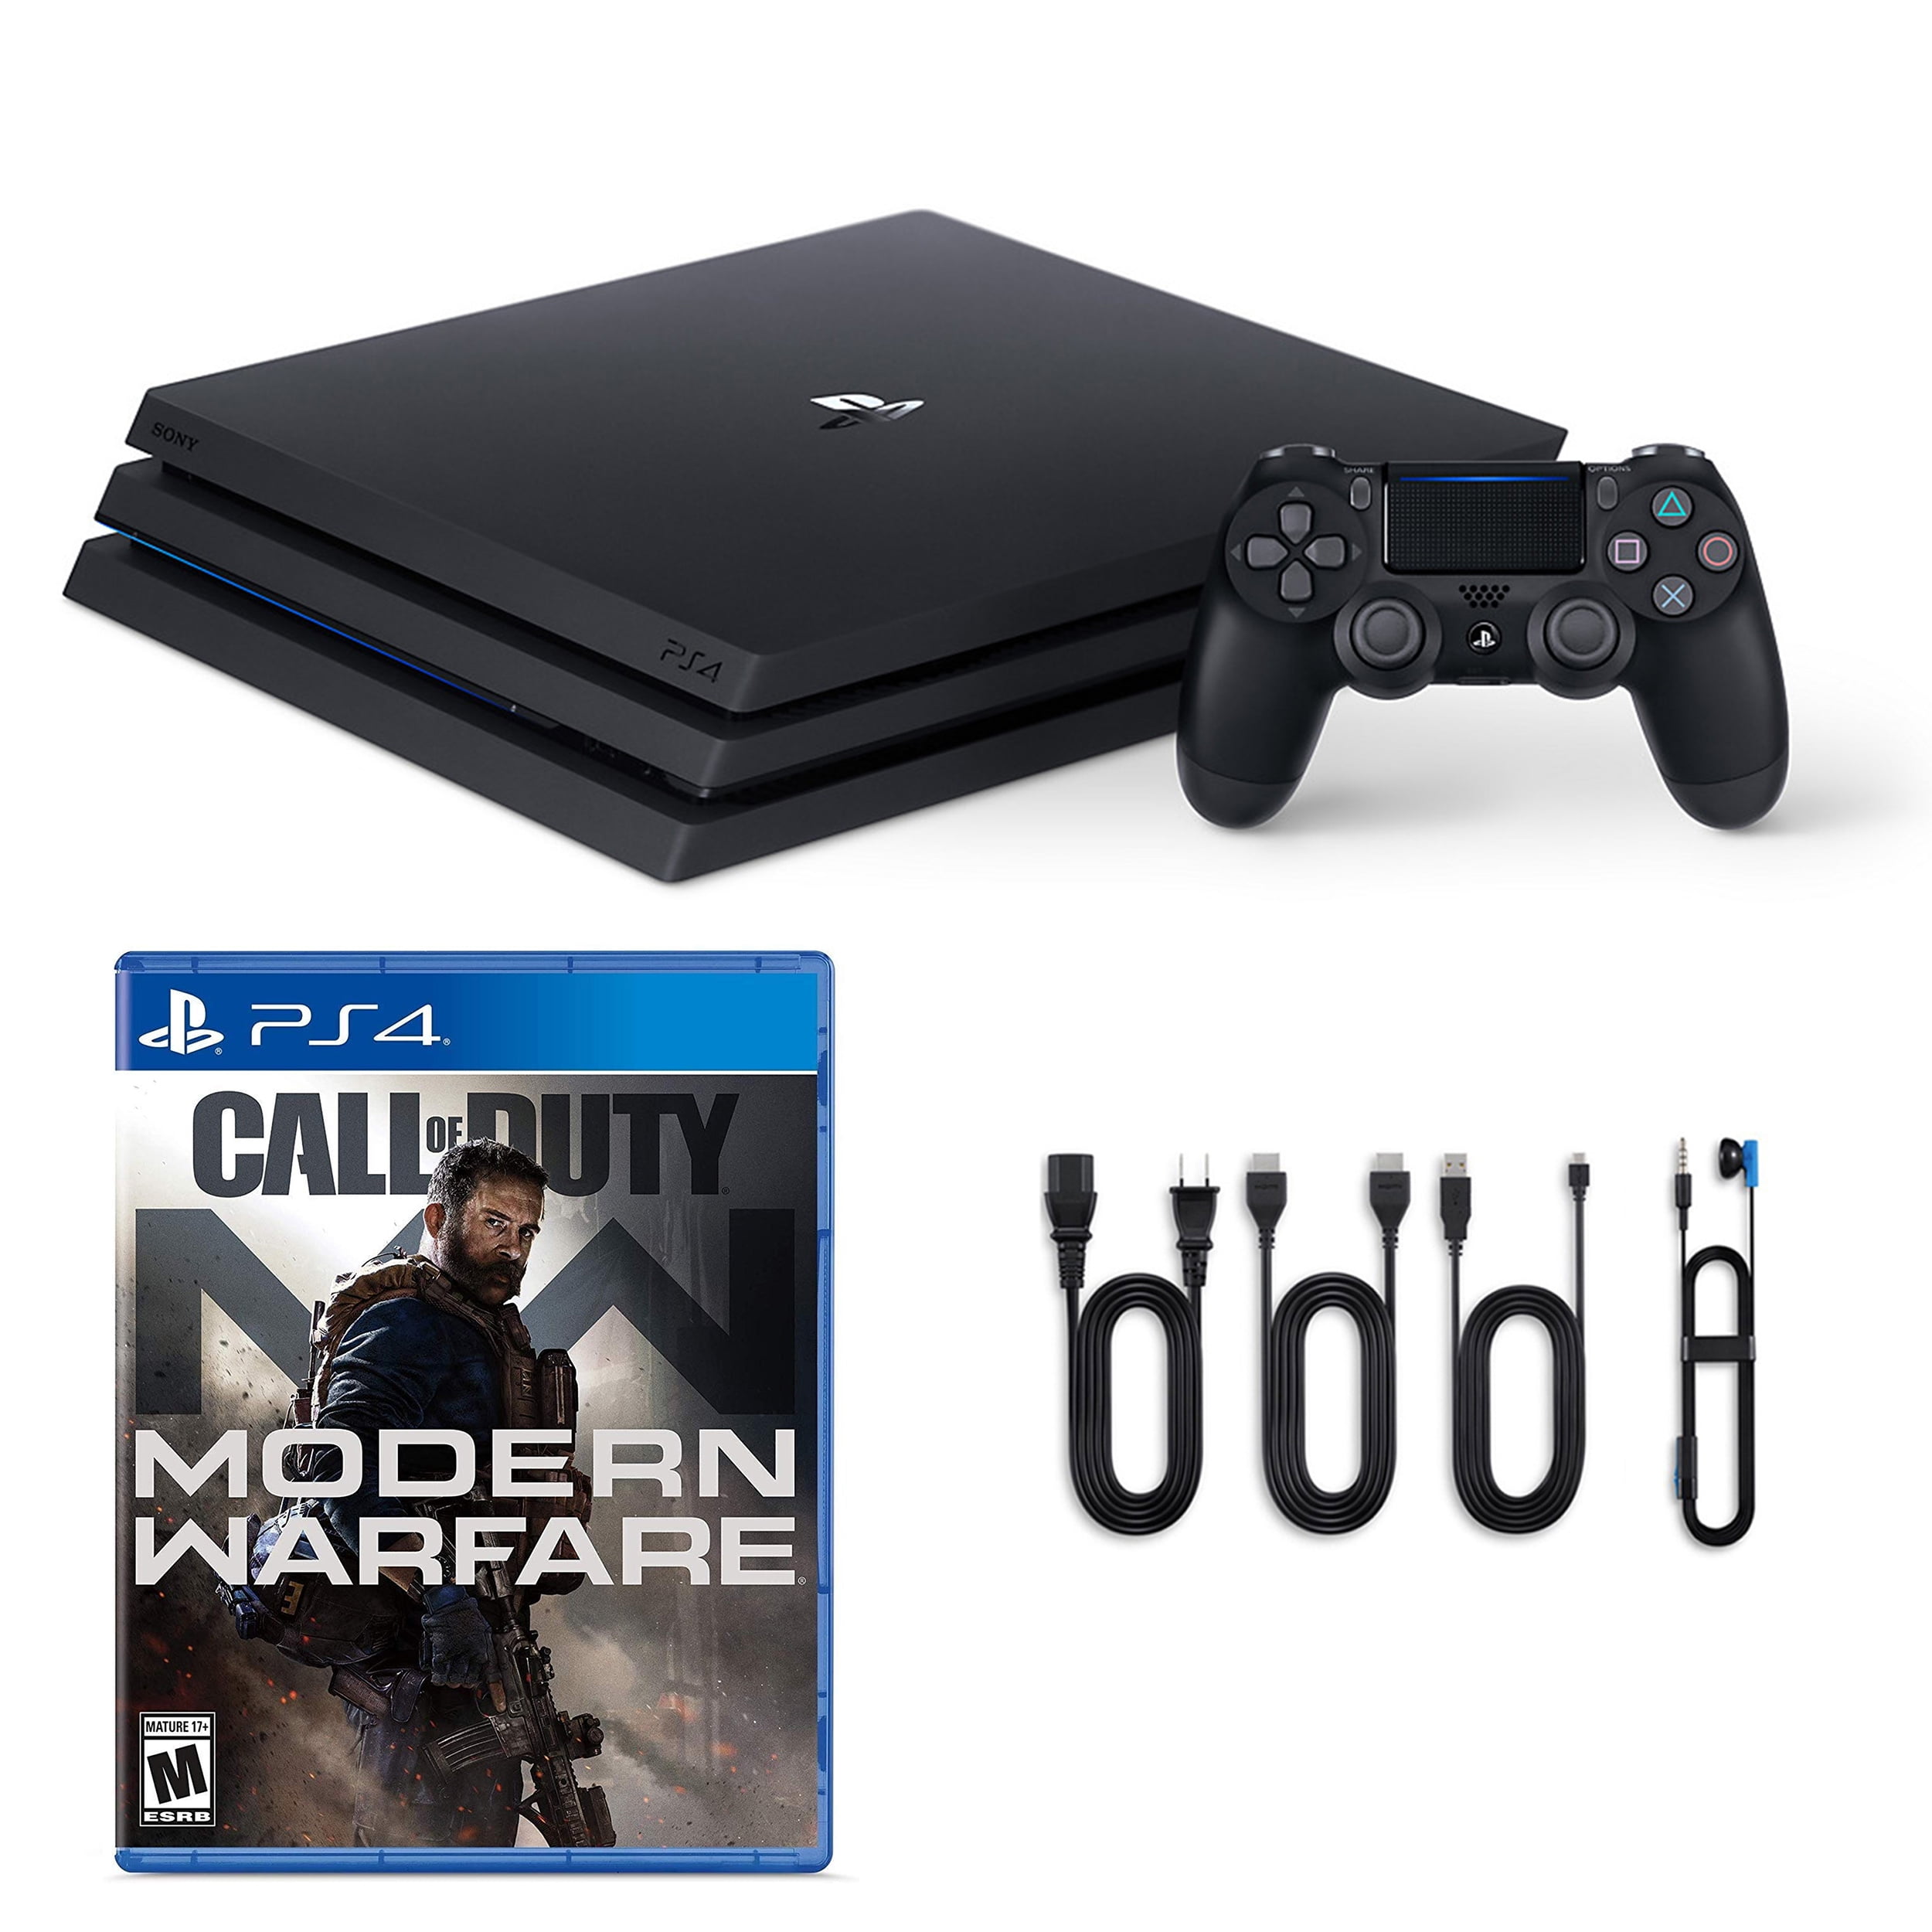 Sony PlayStation 4 PRO 1TB Gaming Console Black with Call Of Duty